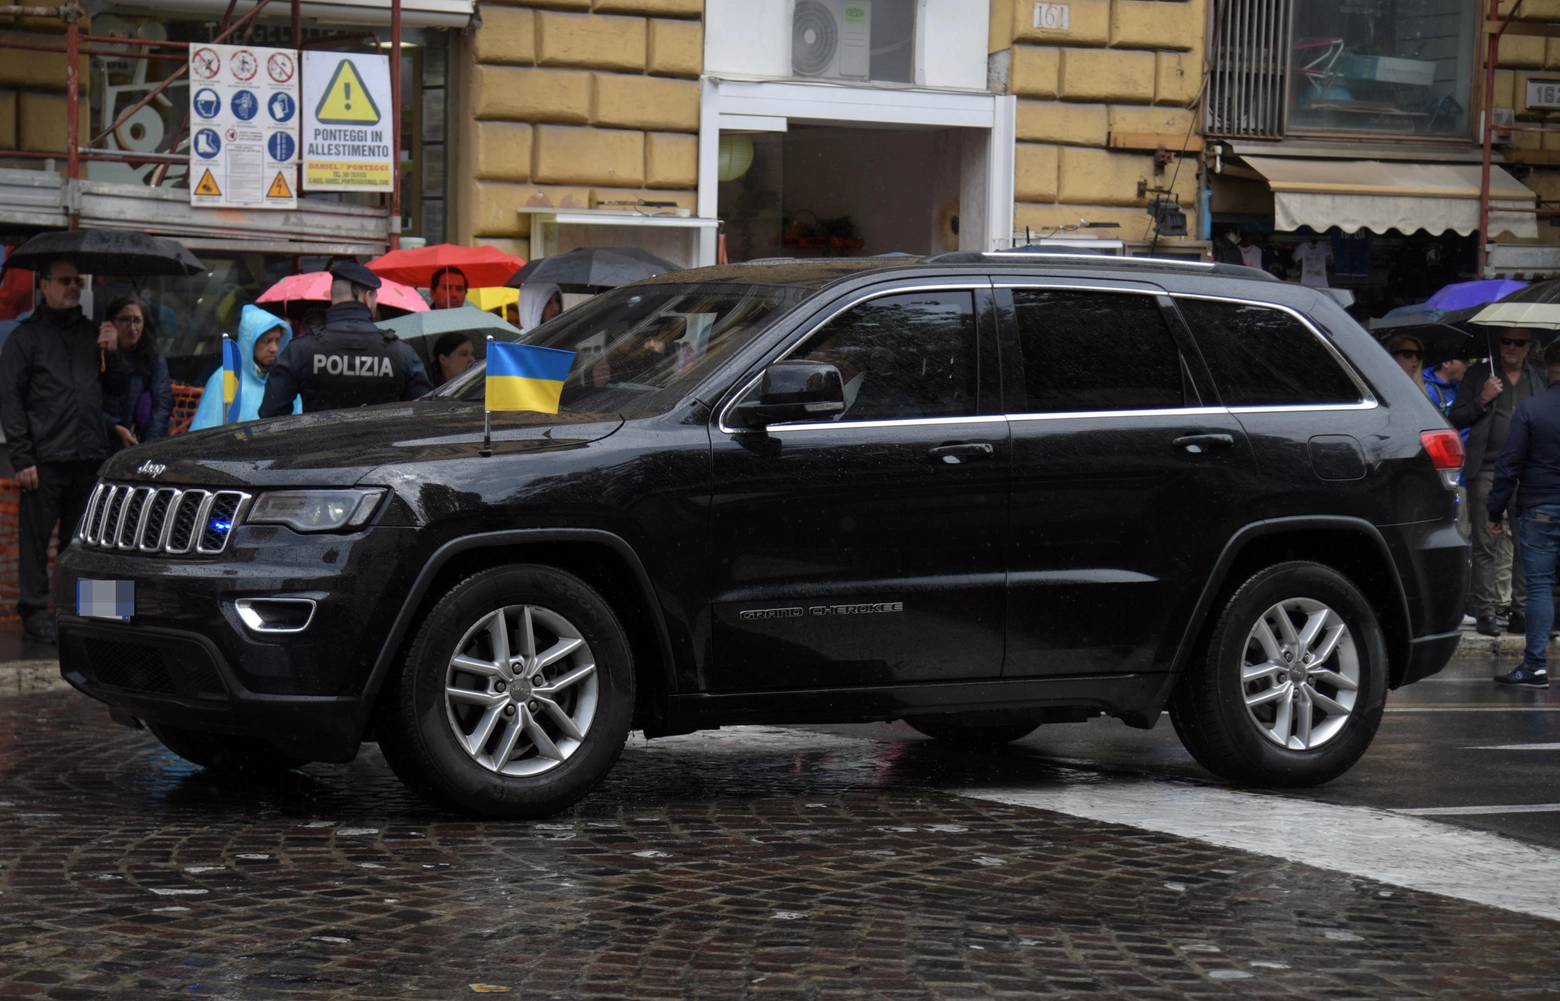 The car (with Ukrainan flags)of Ukrainian President Volodymyr Zelensky near piazza Barberini  on its way to Italian President Mattarella in Rome, Italy, 13 May 2023. It is the first time for Zelensky to visit Italy since the start of the Russian invasion of Ukraine in February 2022. 
ANSA/FABIO CIMAGLIA